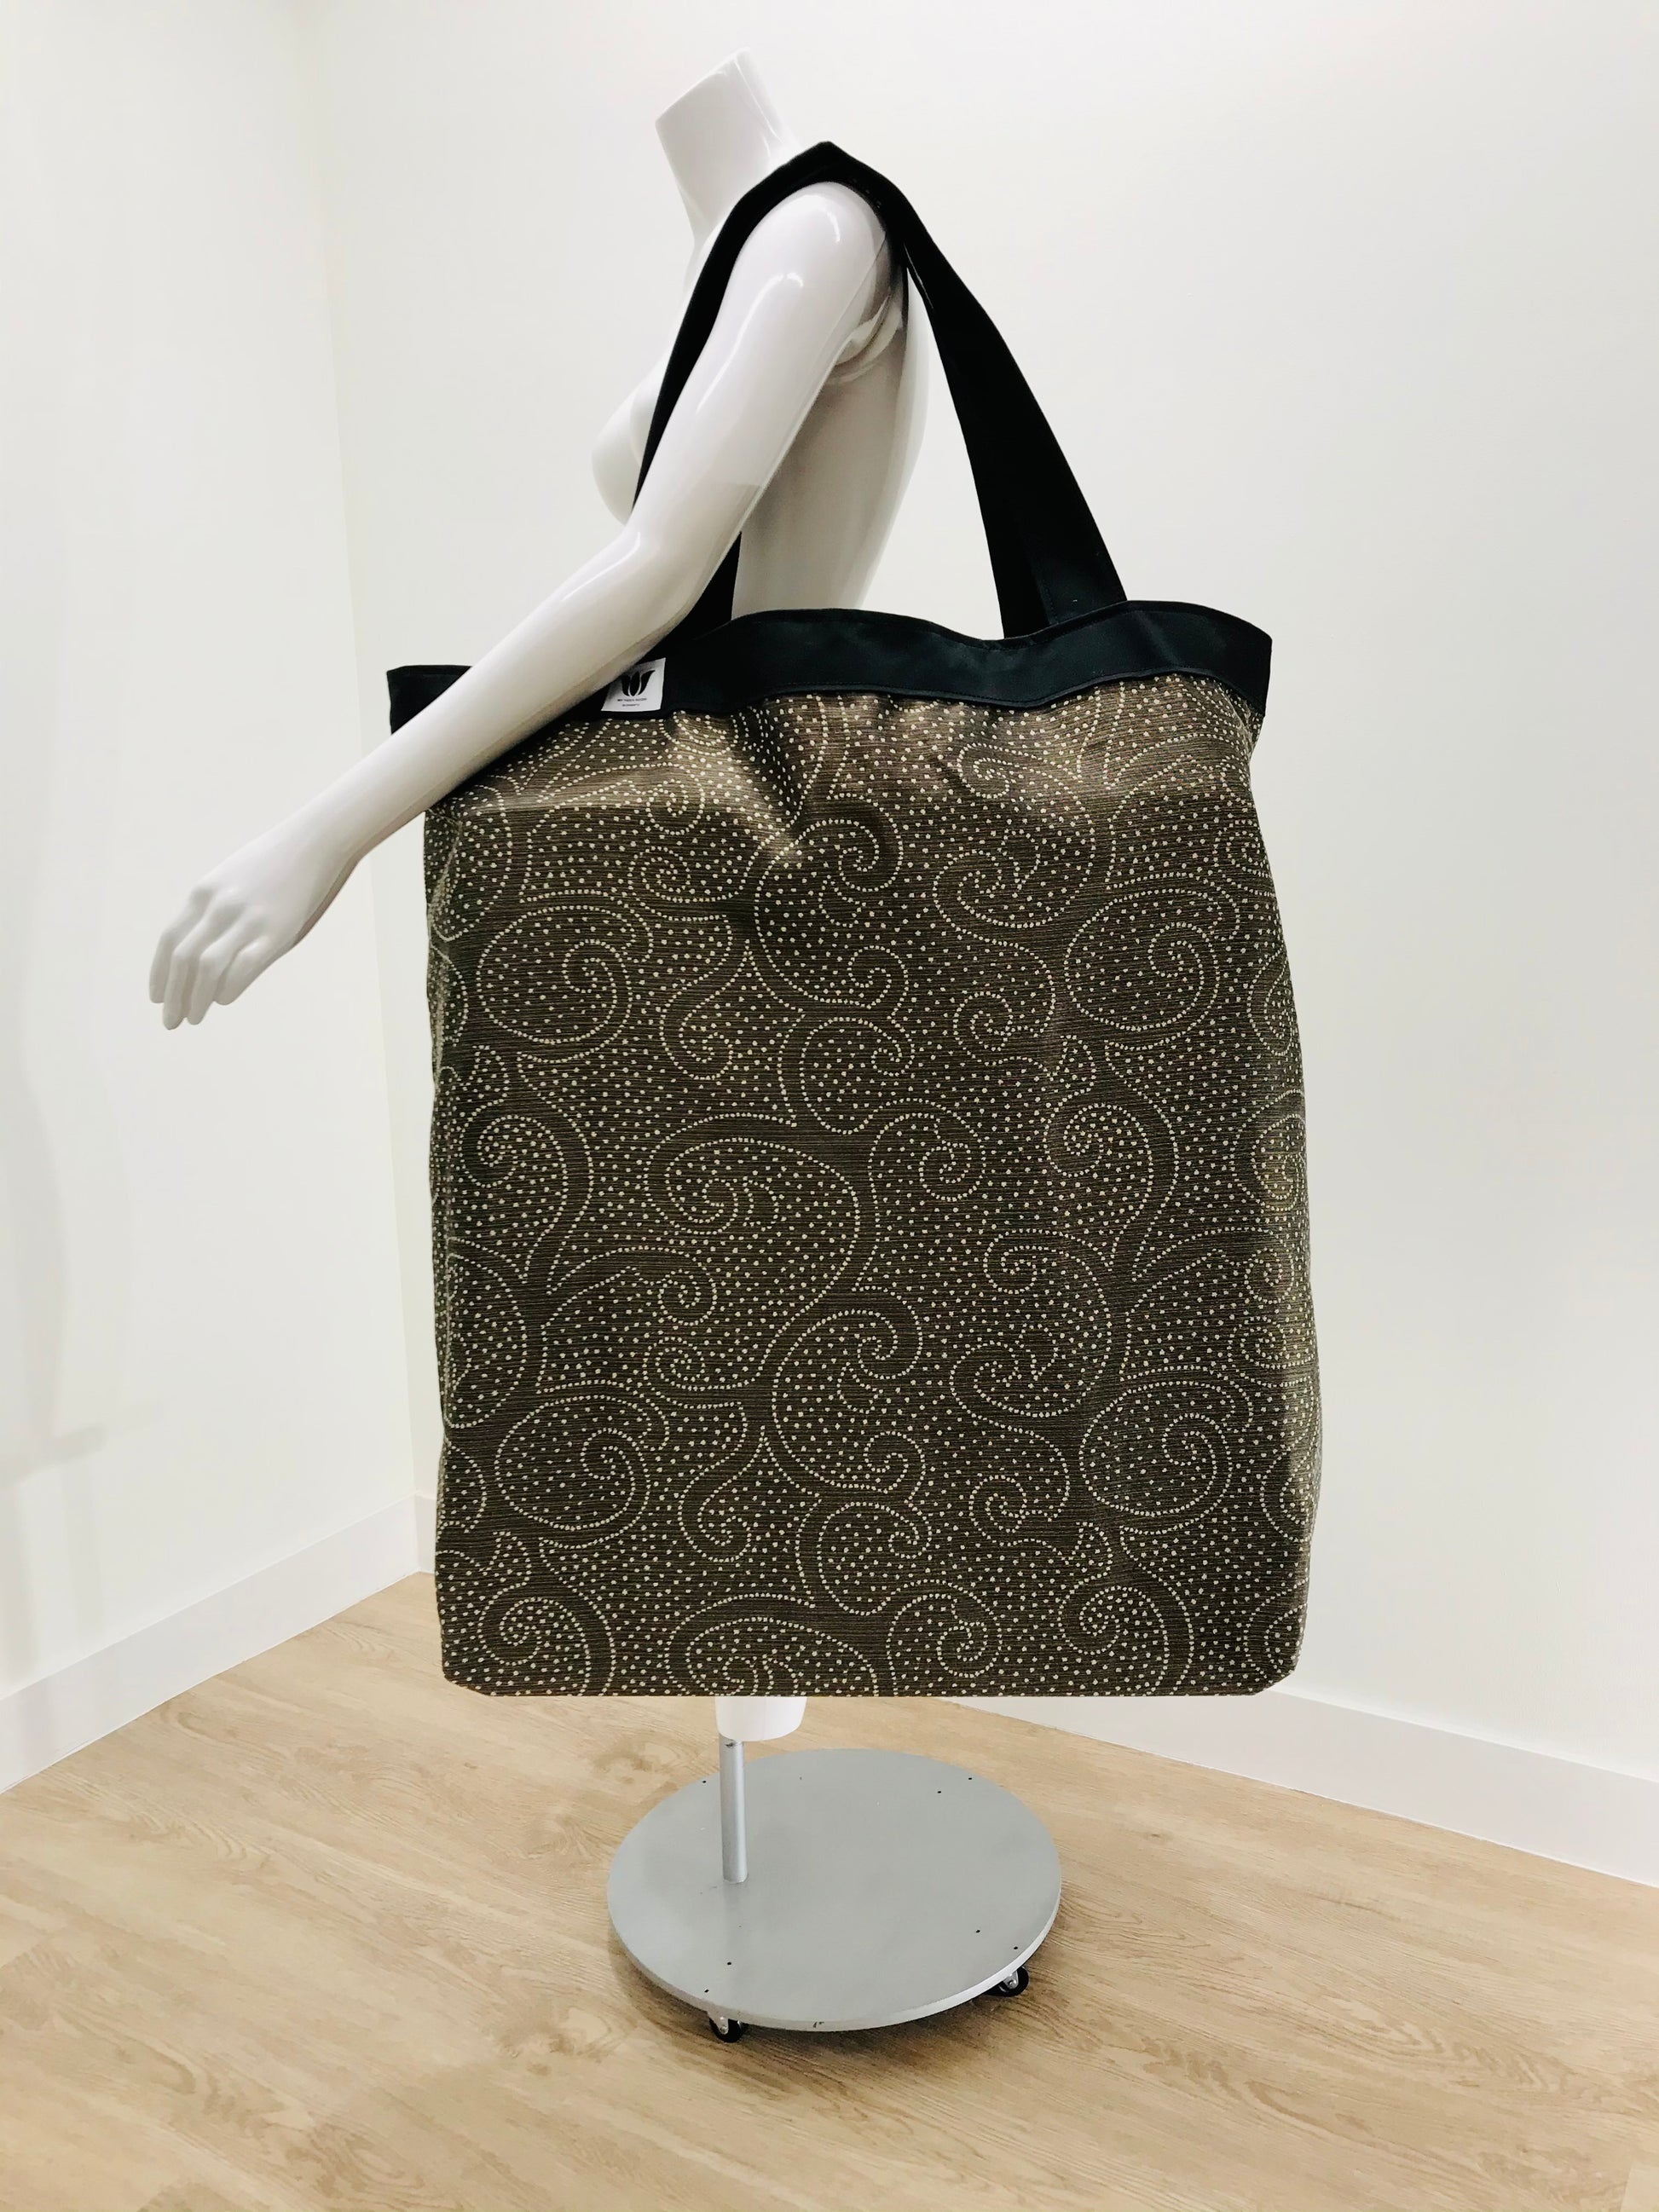 Extra Large Yoga Tote Bag in brown subtle graphic scroll print to carry and or store yoga props for yoga practice. Made in Canada by My Yoga Room Elements